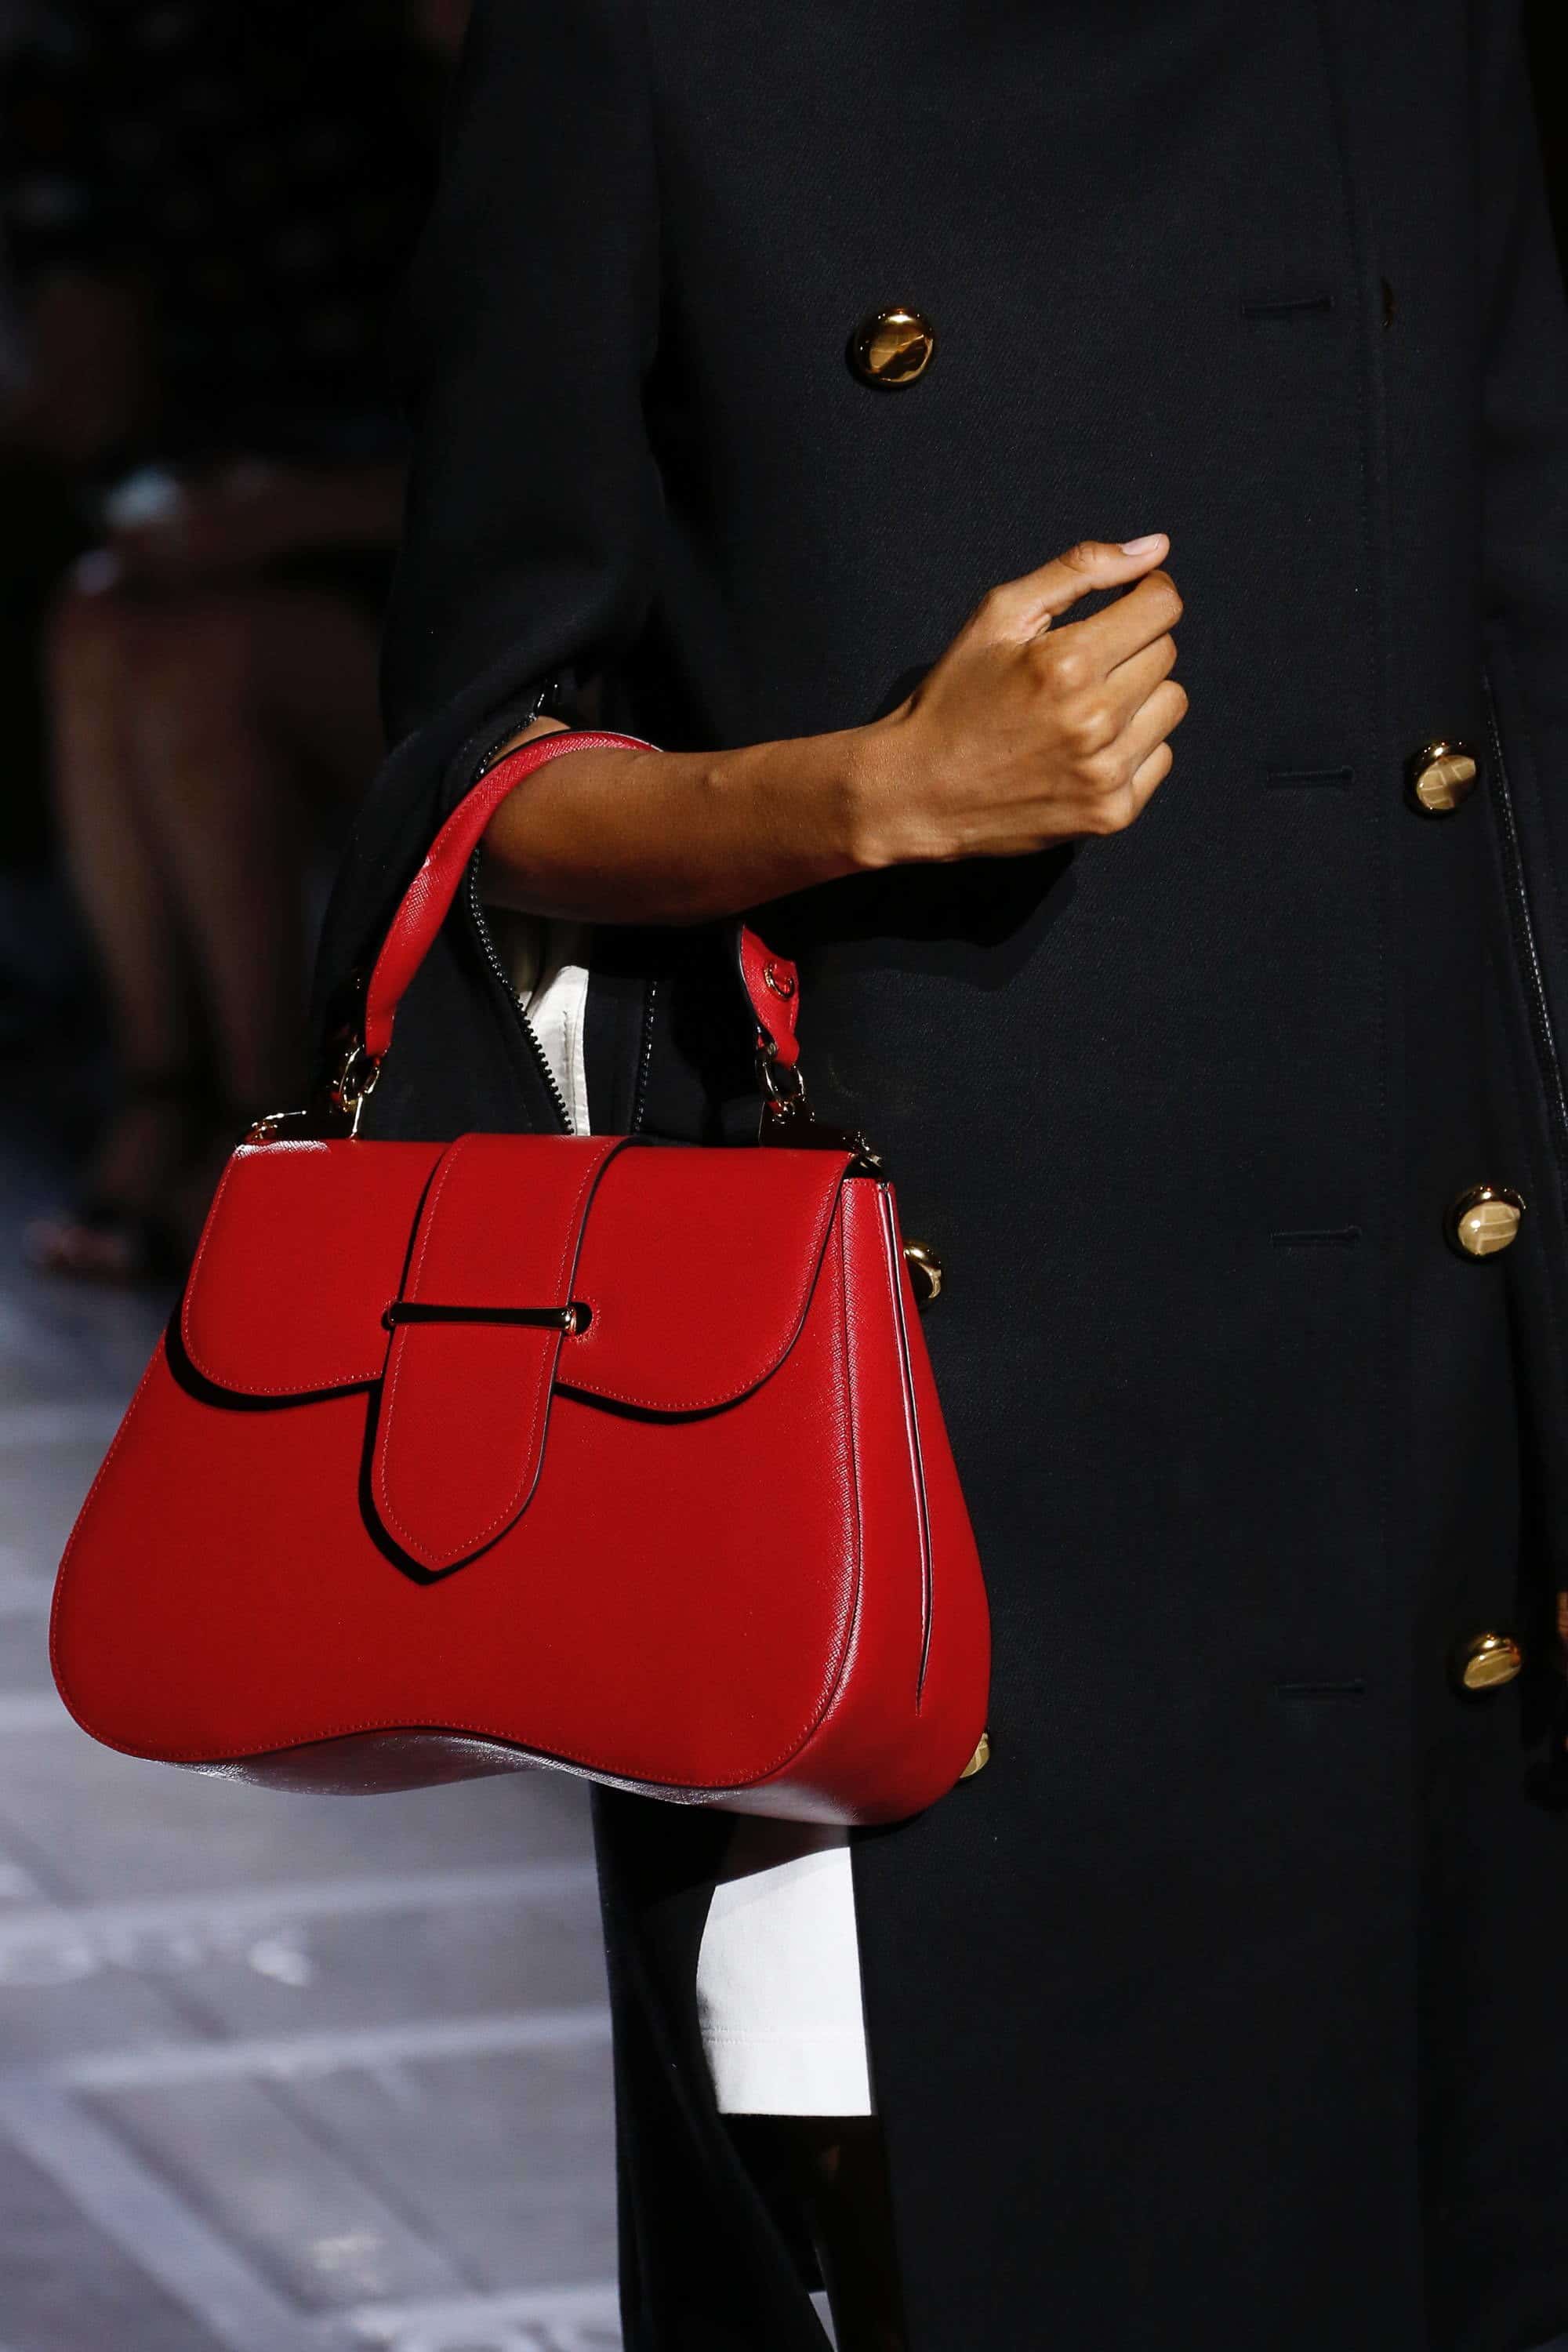 Confirmed: Prada Sidonie is the bag that will dominate Spring 2019